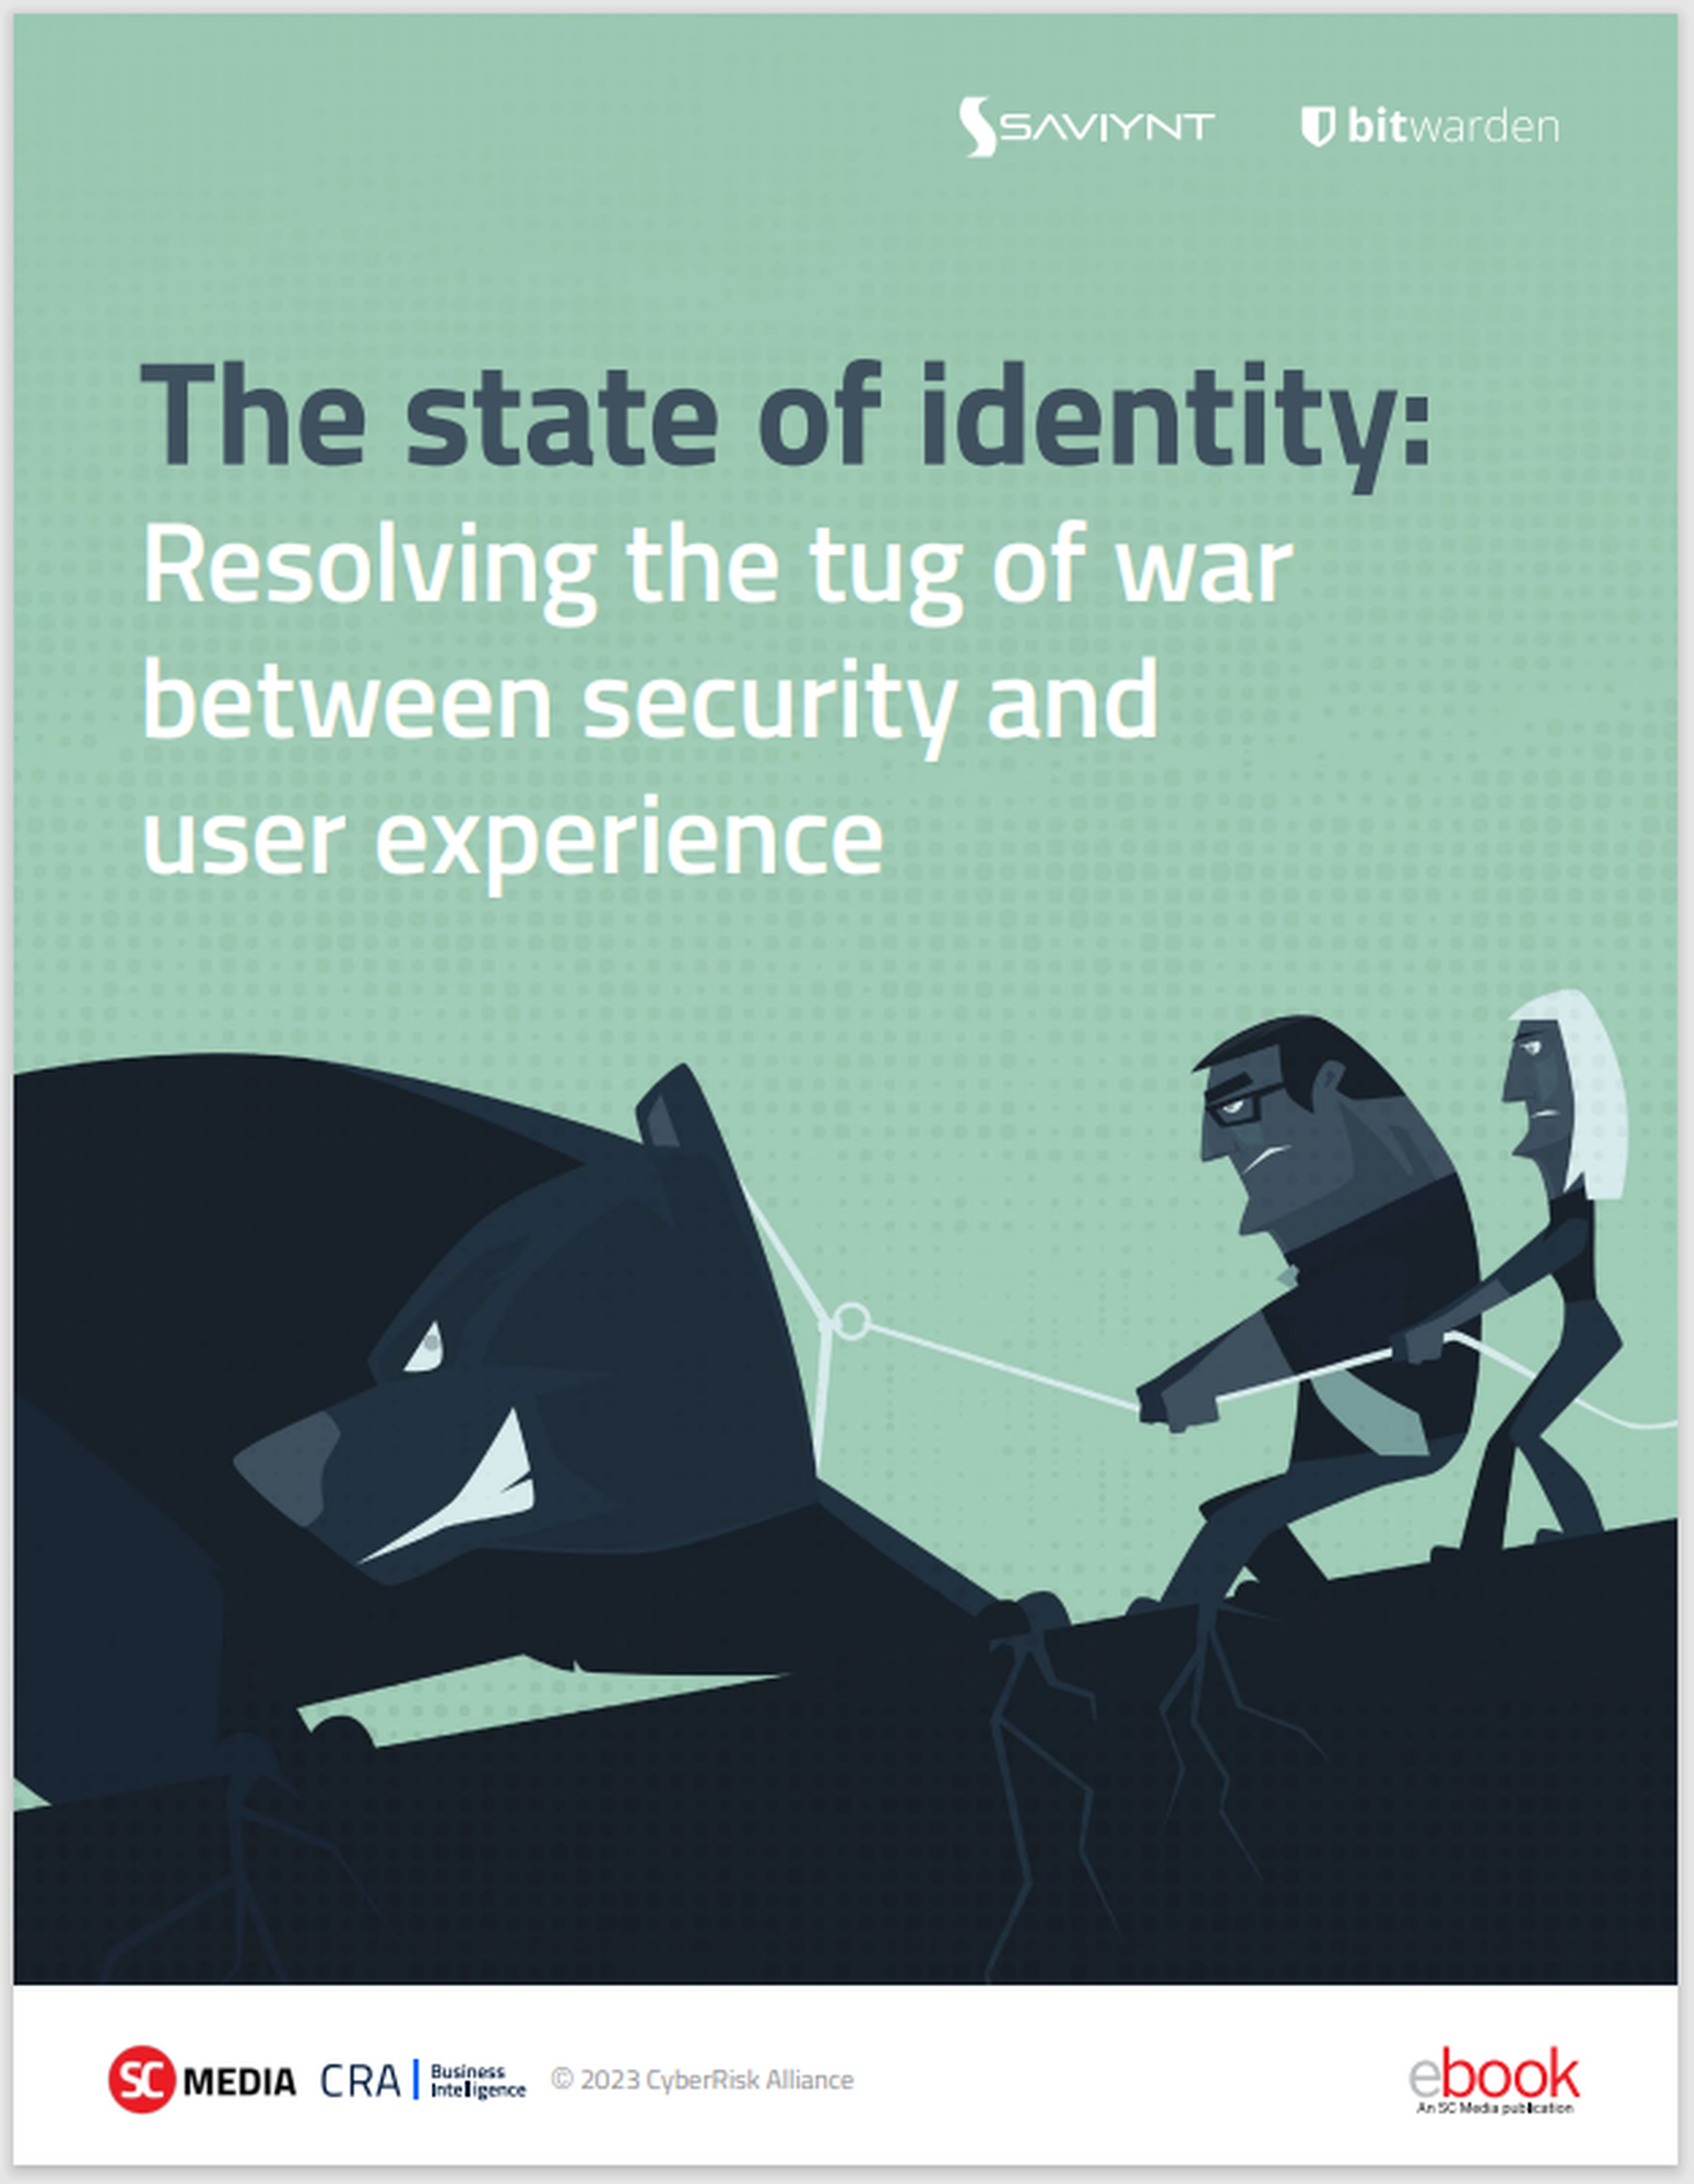 The state of identity: Resolving the tug of war between security and user experience